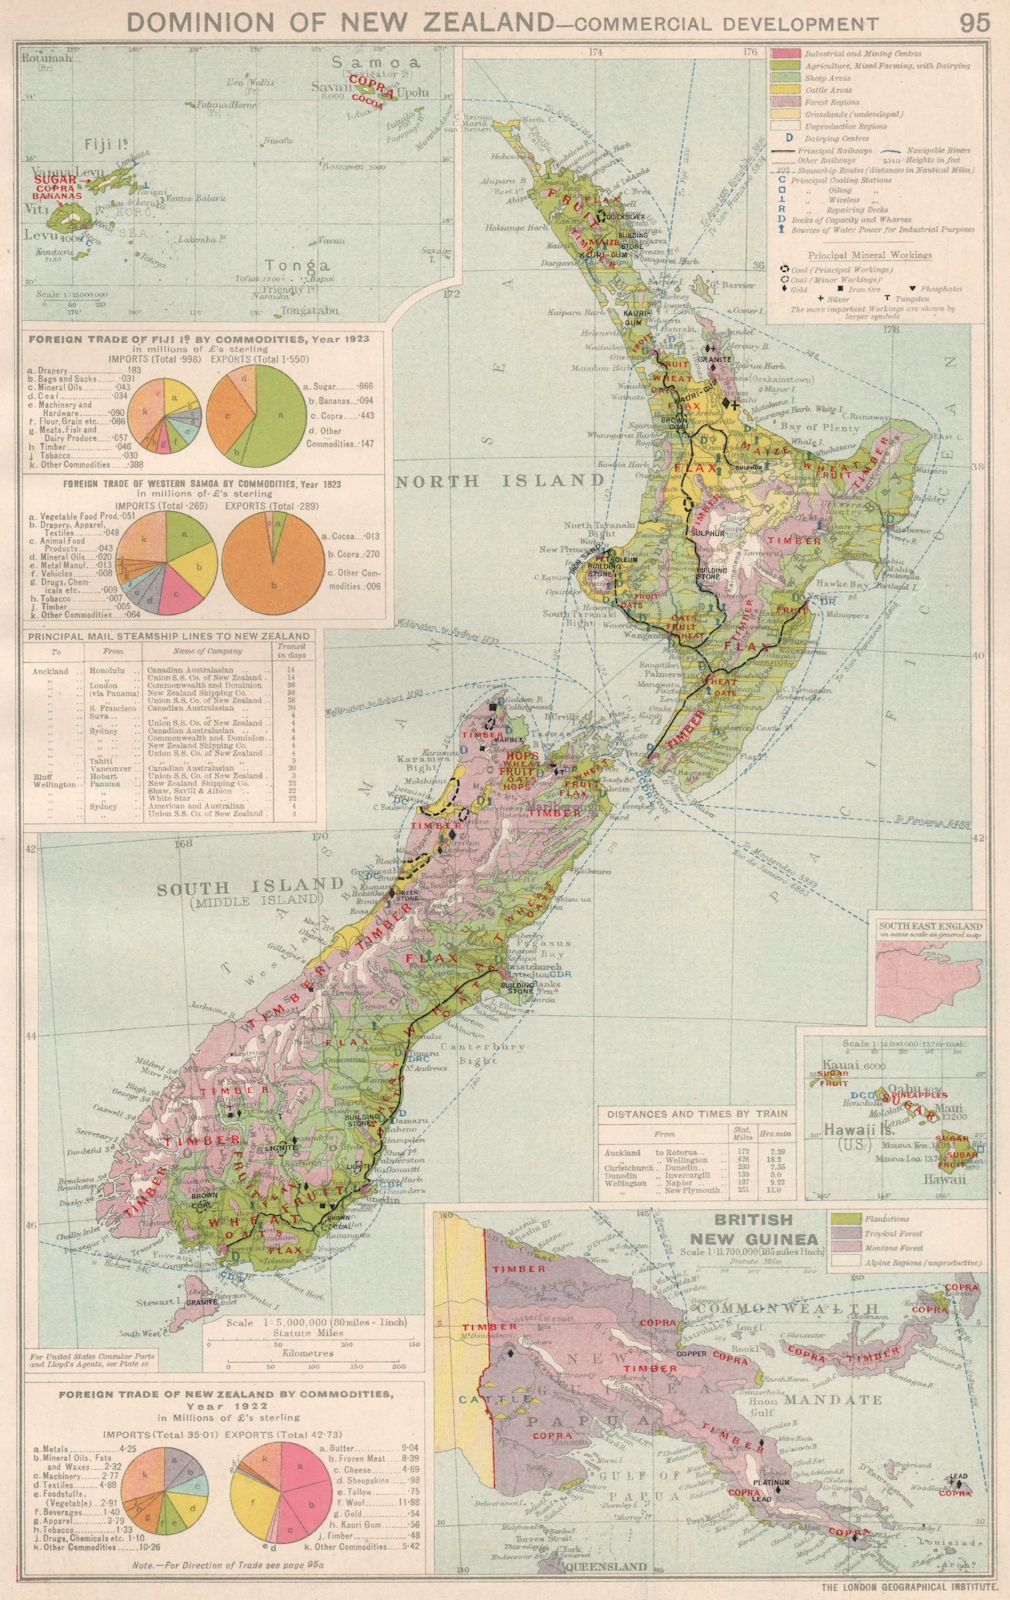 New Zealand. Commercial Development. Agricultural, Minerals & Mining 1925 map